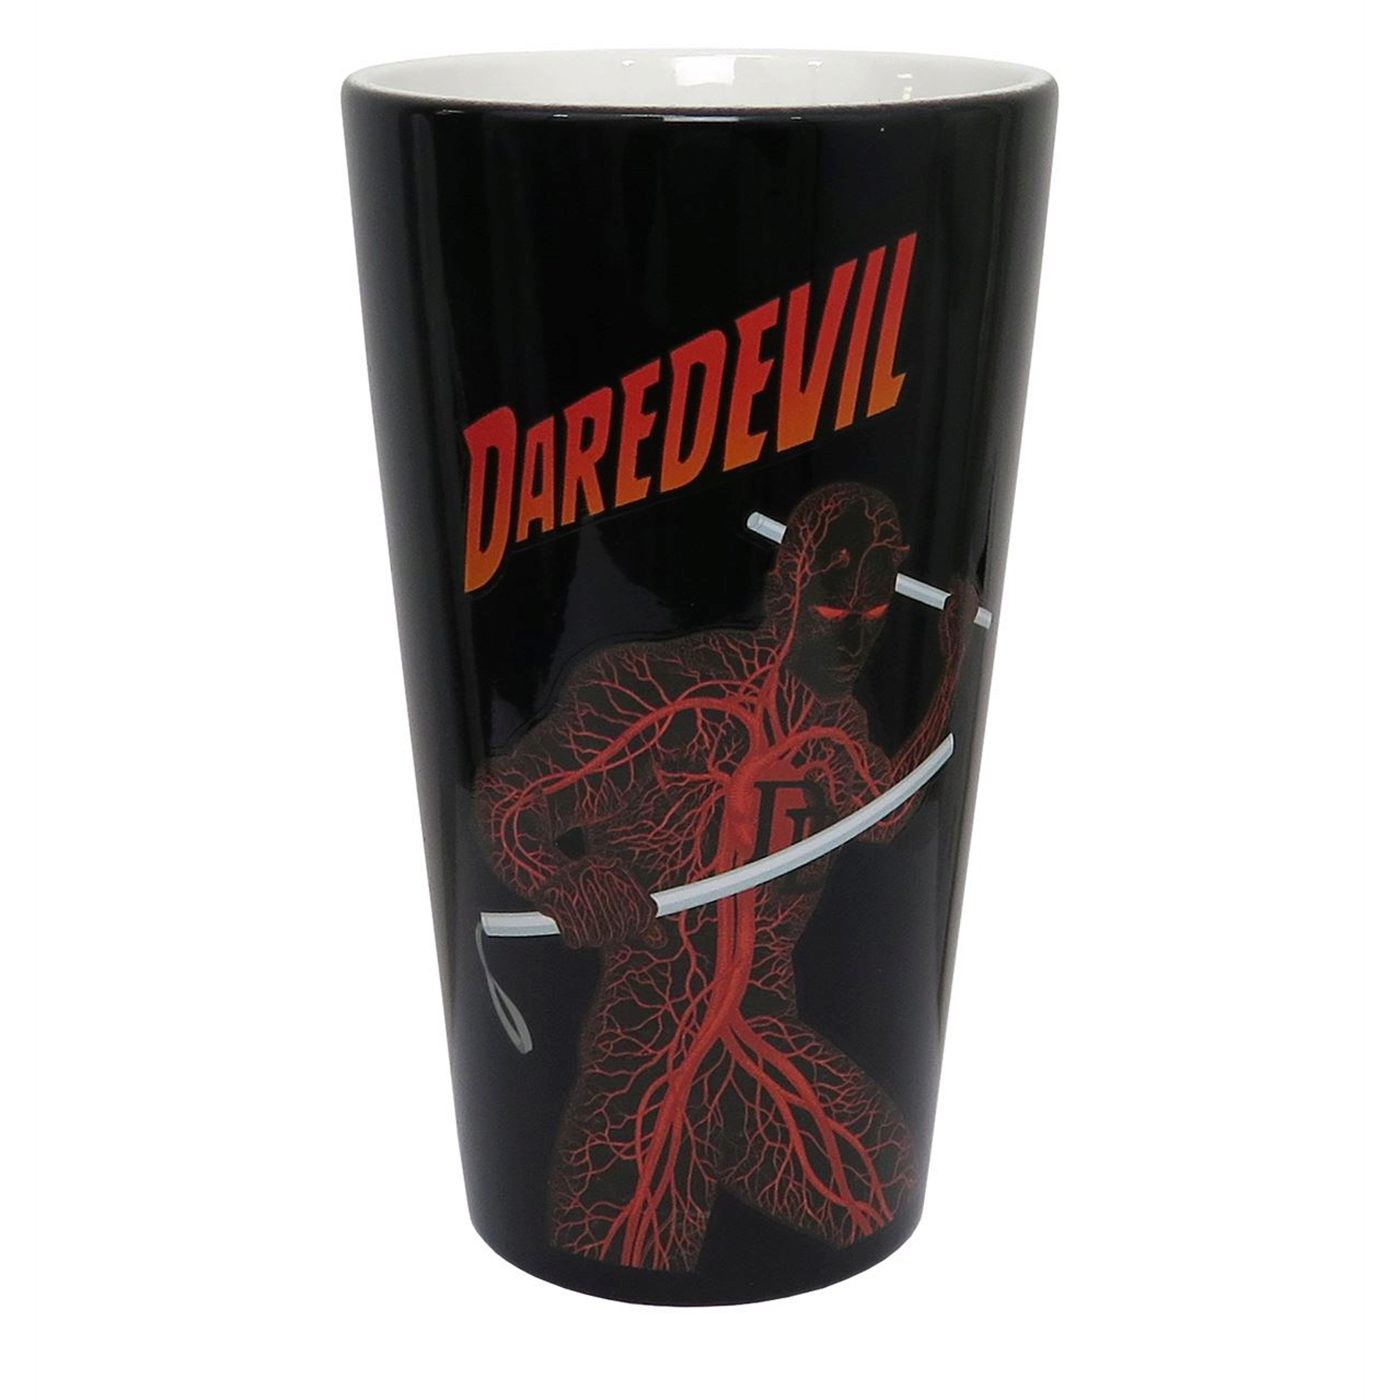 Daredevil The Man Without Fear Pint Glass